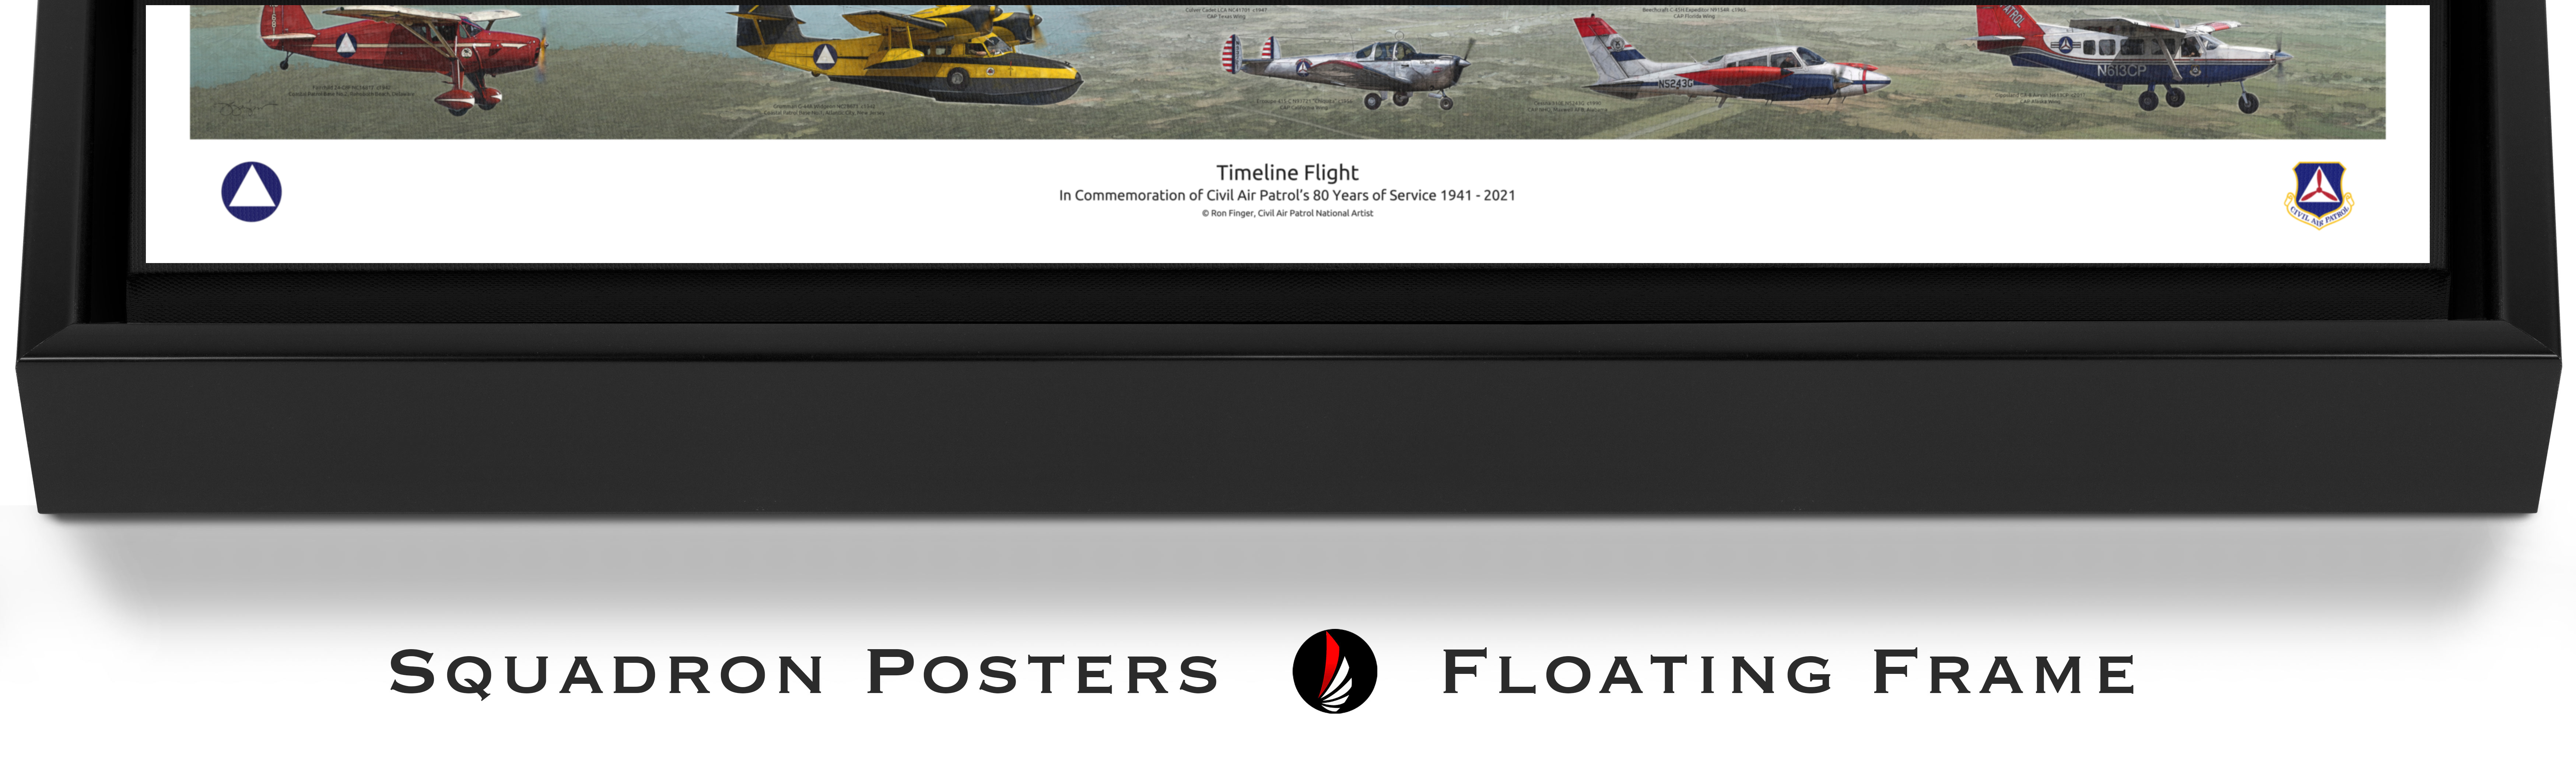 Timeline Flight Wide - Squadron Posters